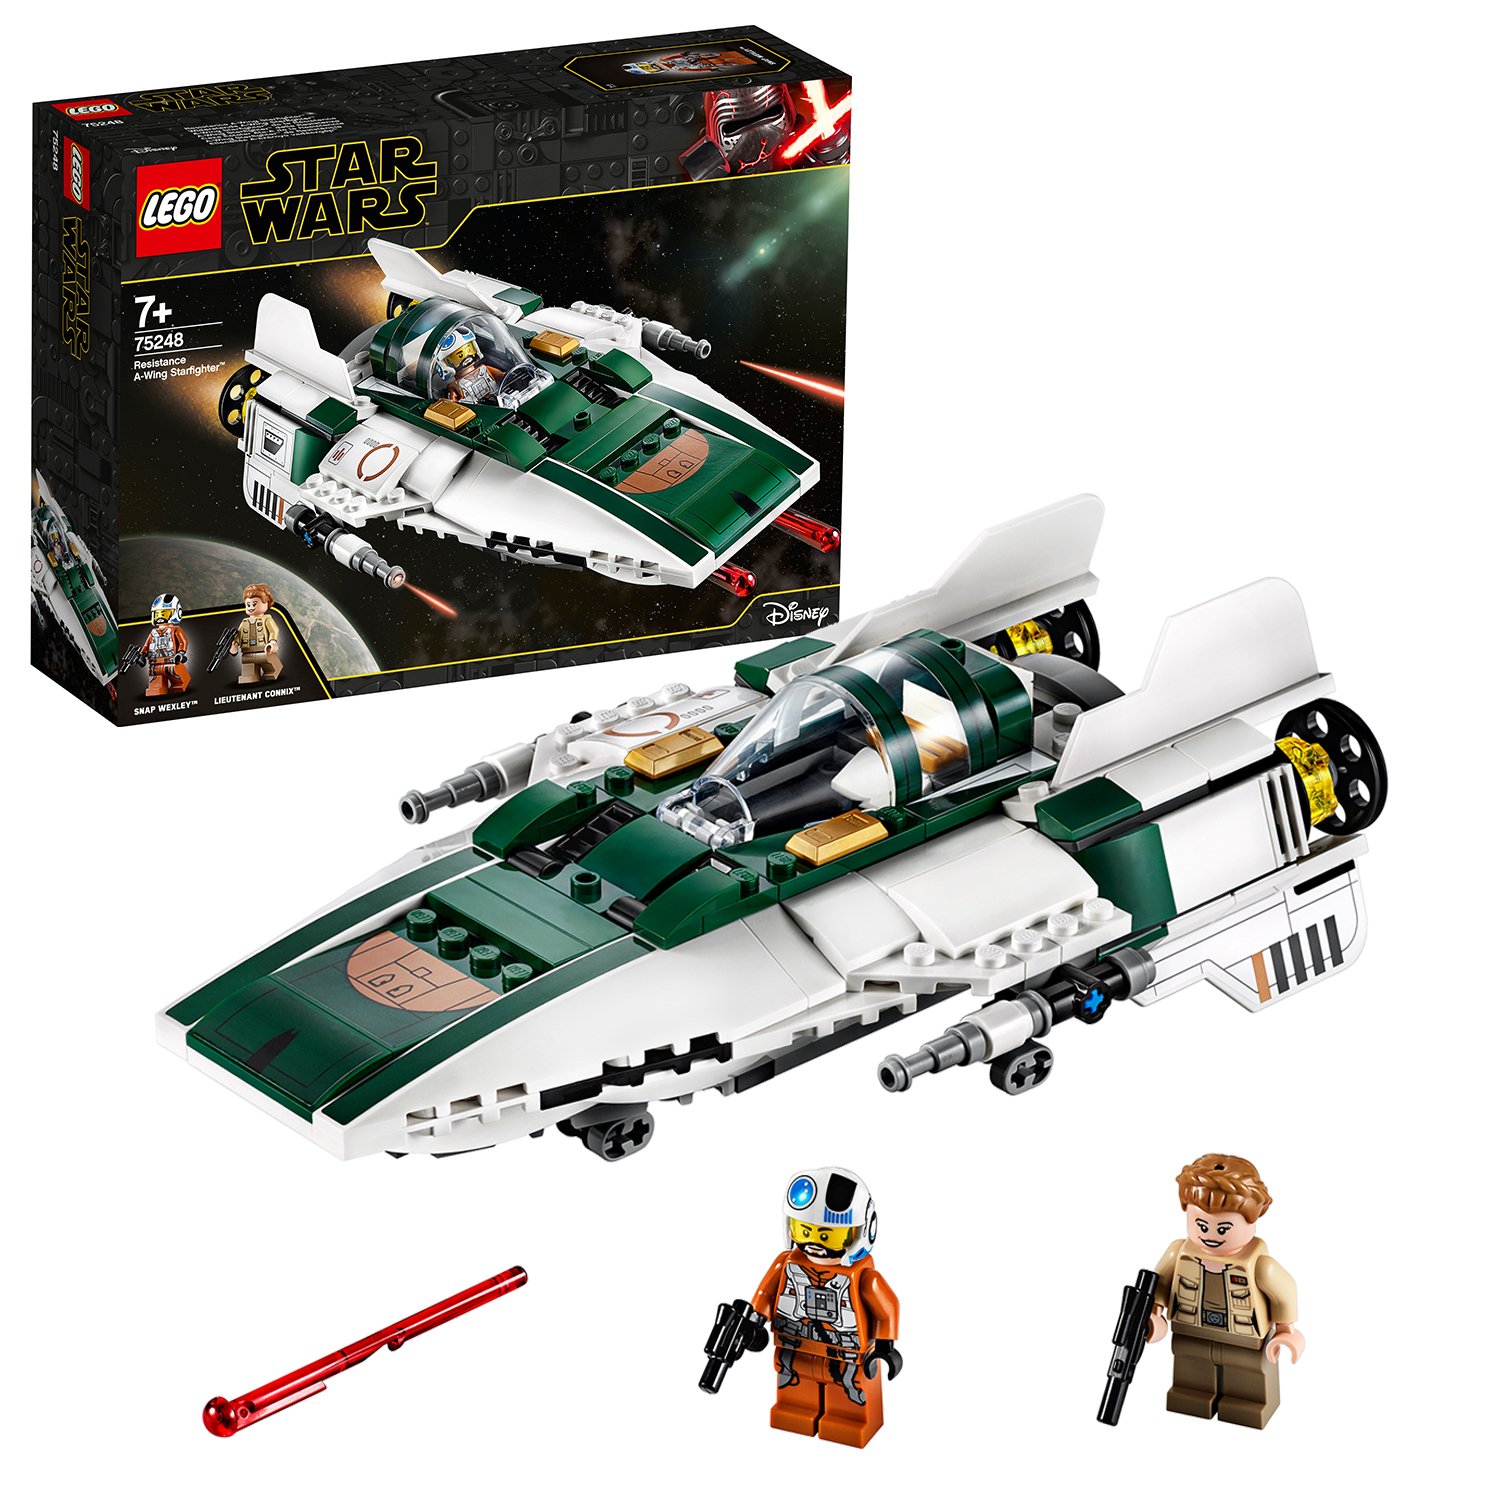 LEGO Star Wars Resistance A-Wing Starfighter Set - 75248